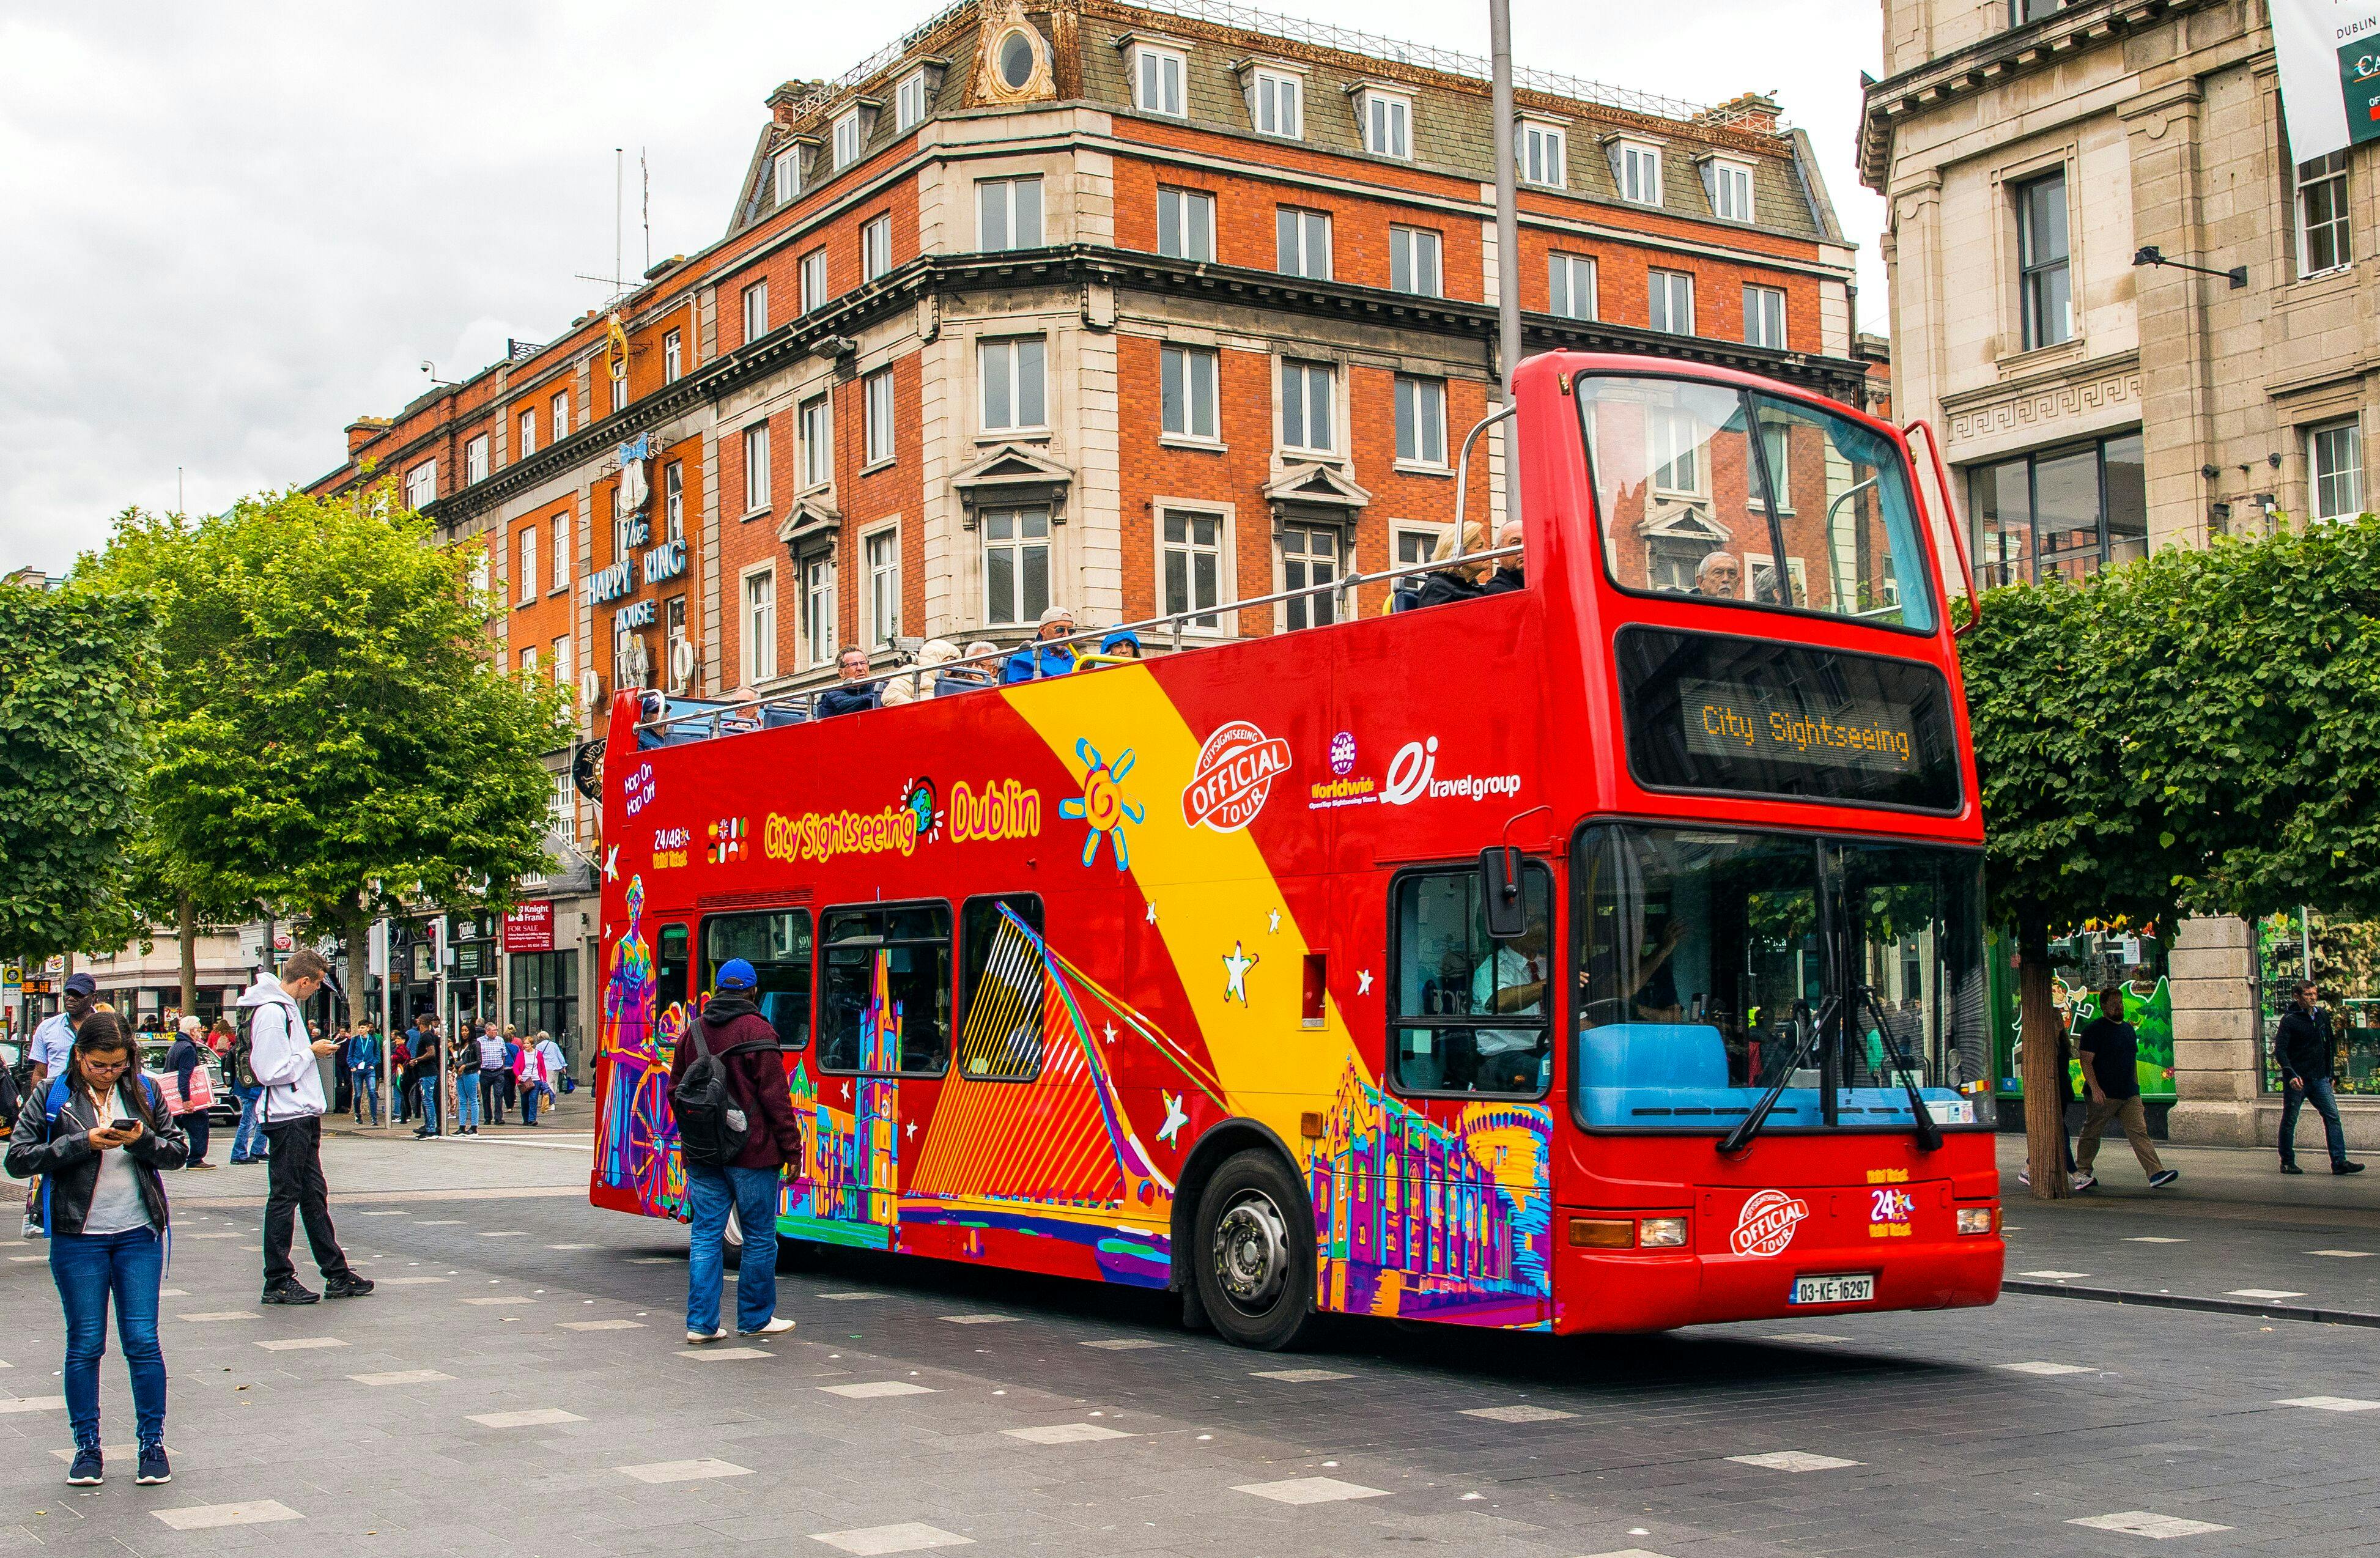 City Sightseeing hop-on hop-off bus tour with walking tour of Dublin